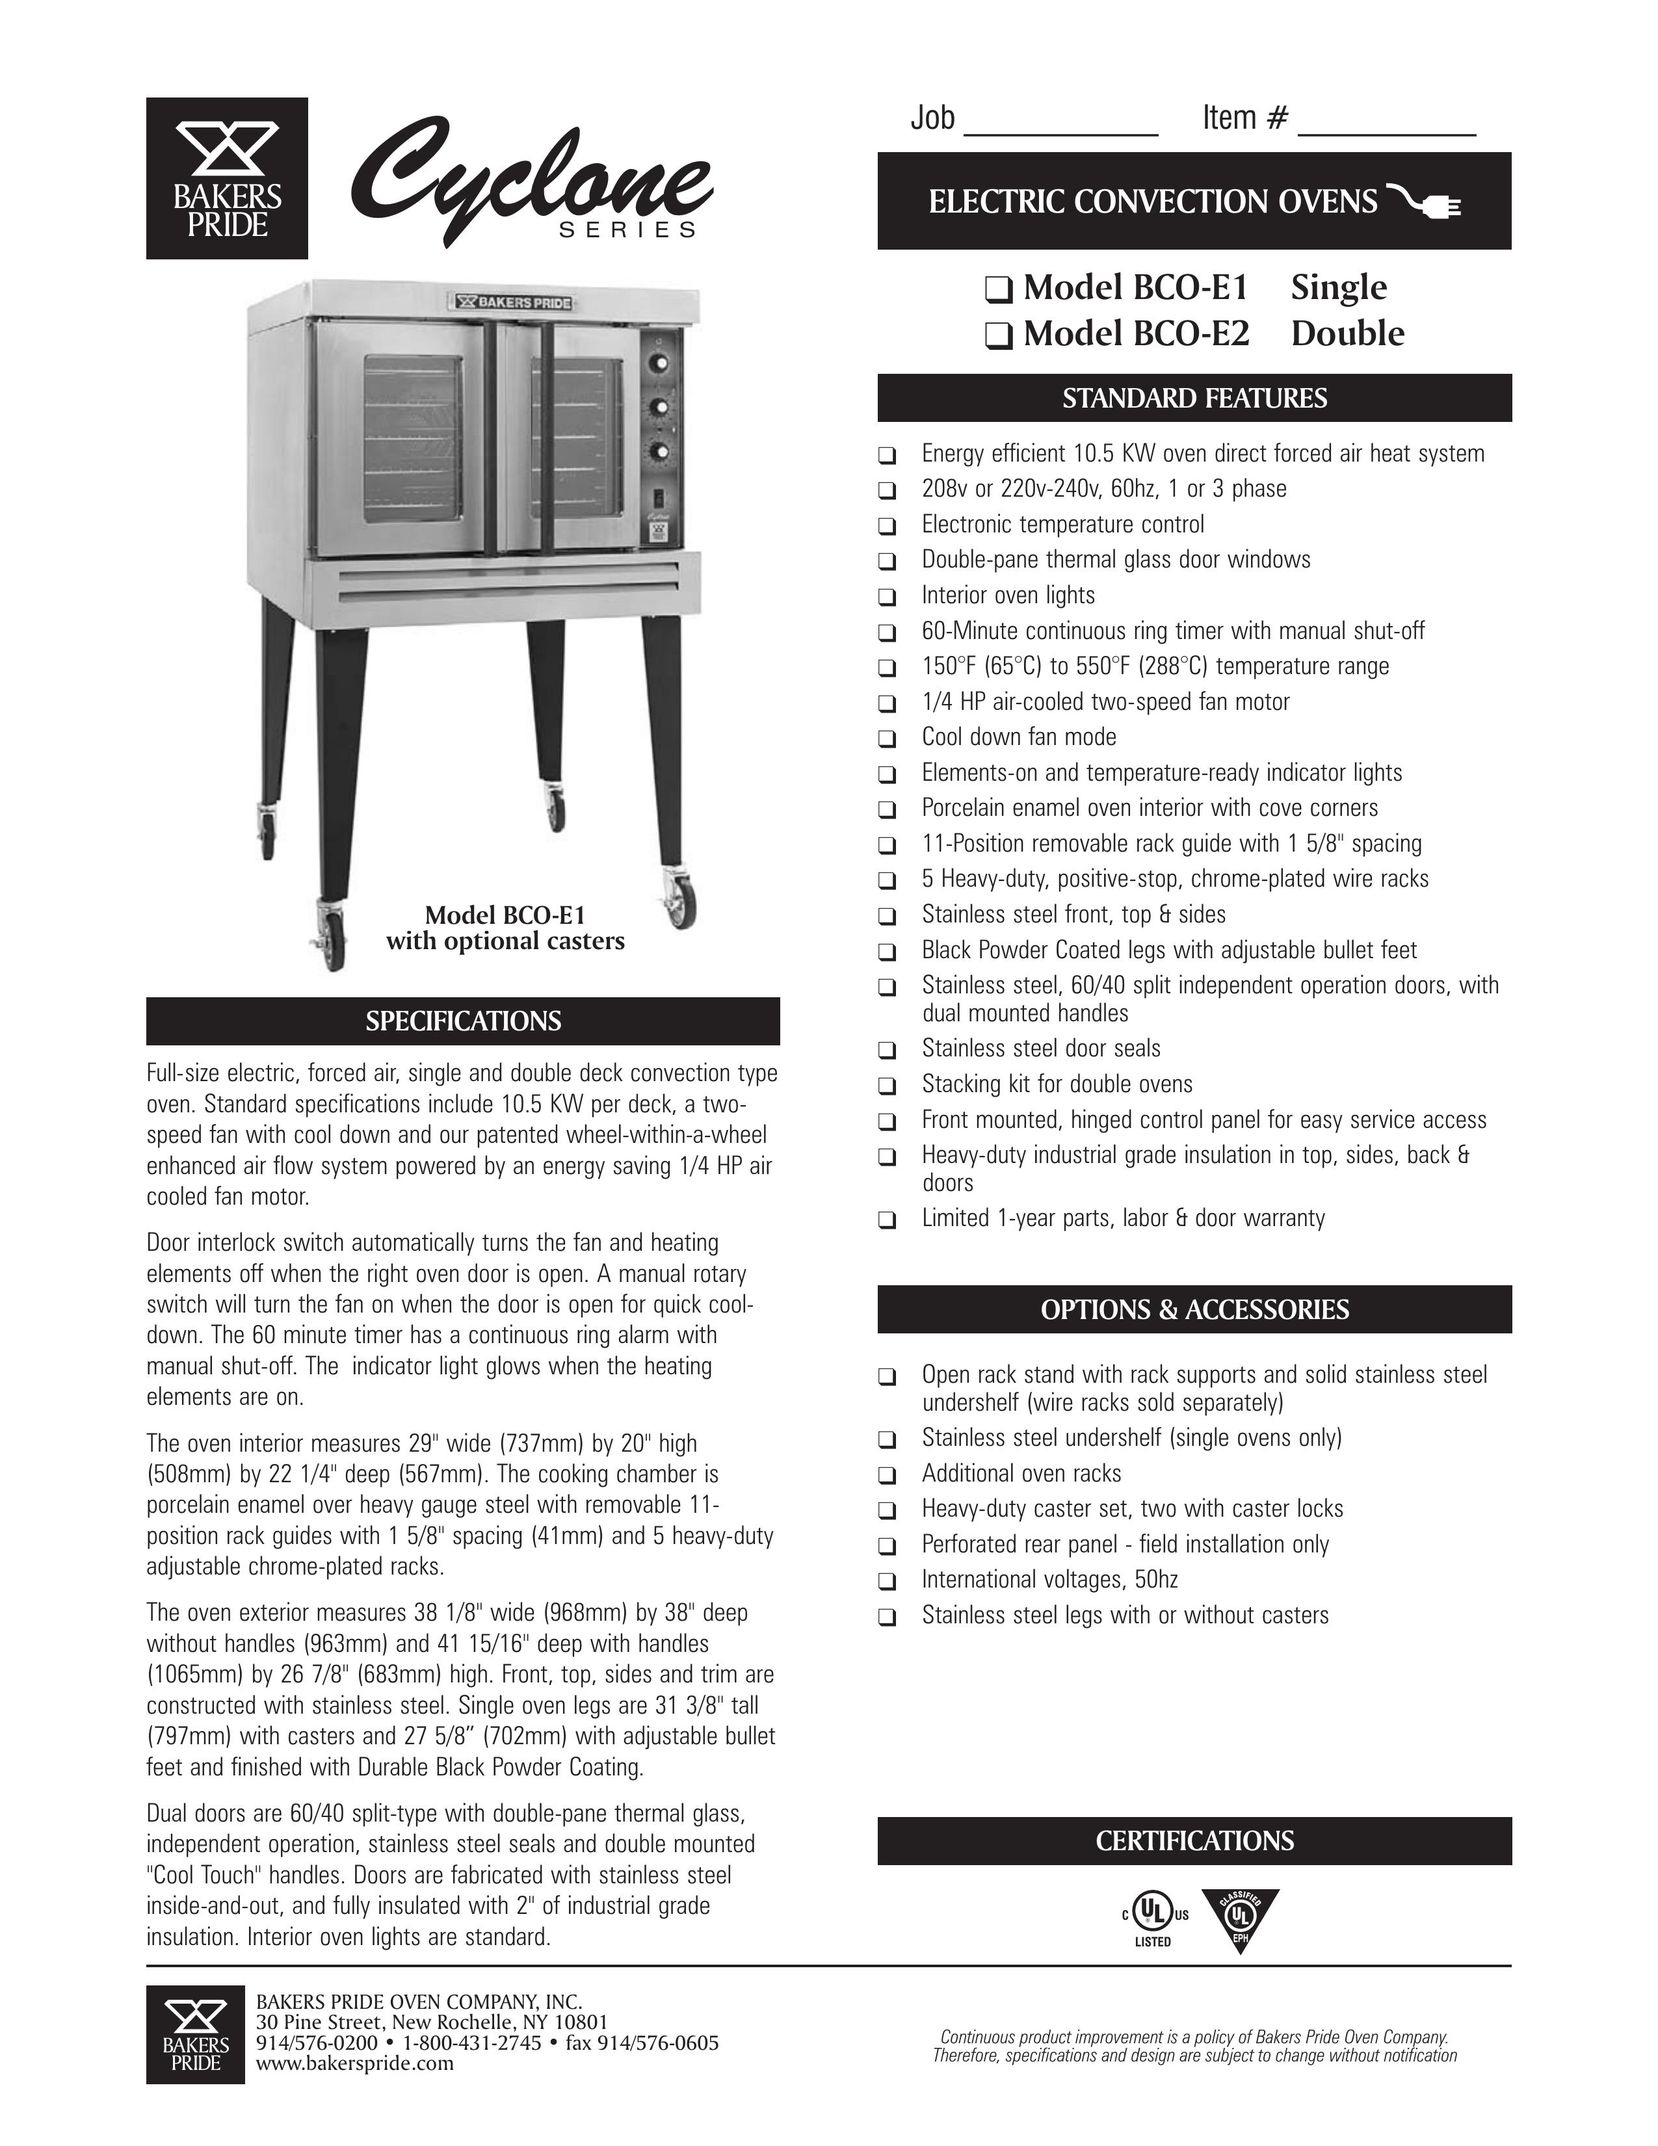 Bakers Pride Oven BCO-E1 Convection Oven User Manual